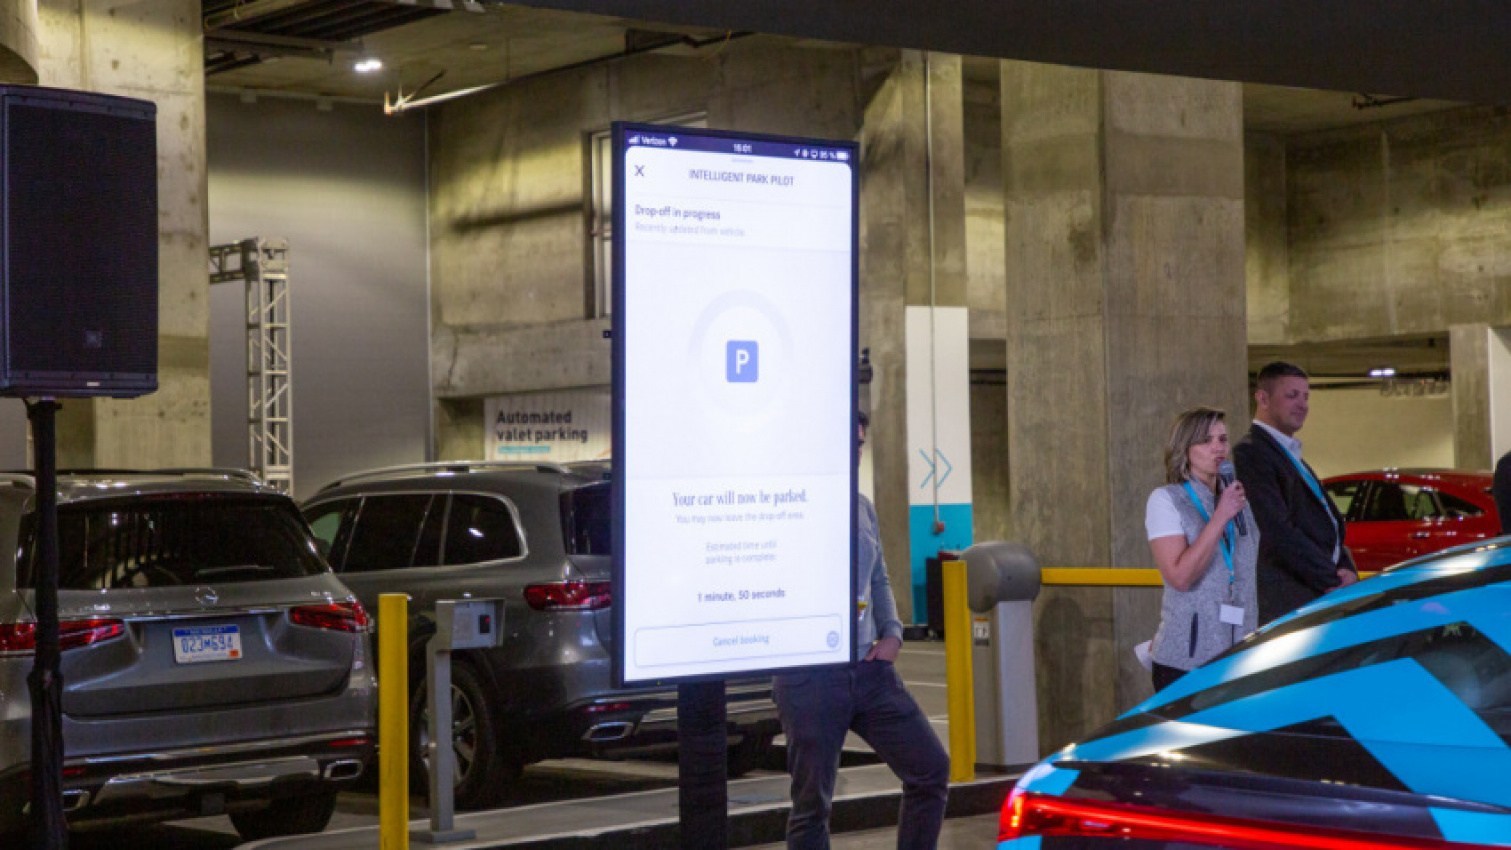 autos, cars, mercedes-benz, car safety, luxury cars, mercedes, mercedes-benz news, news, mercedes-benz tests automated valet parking and drive pilot hands-free driving in us